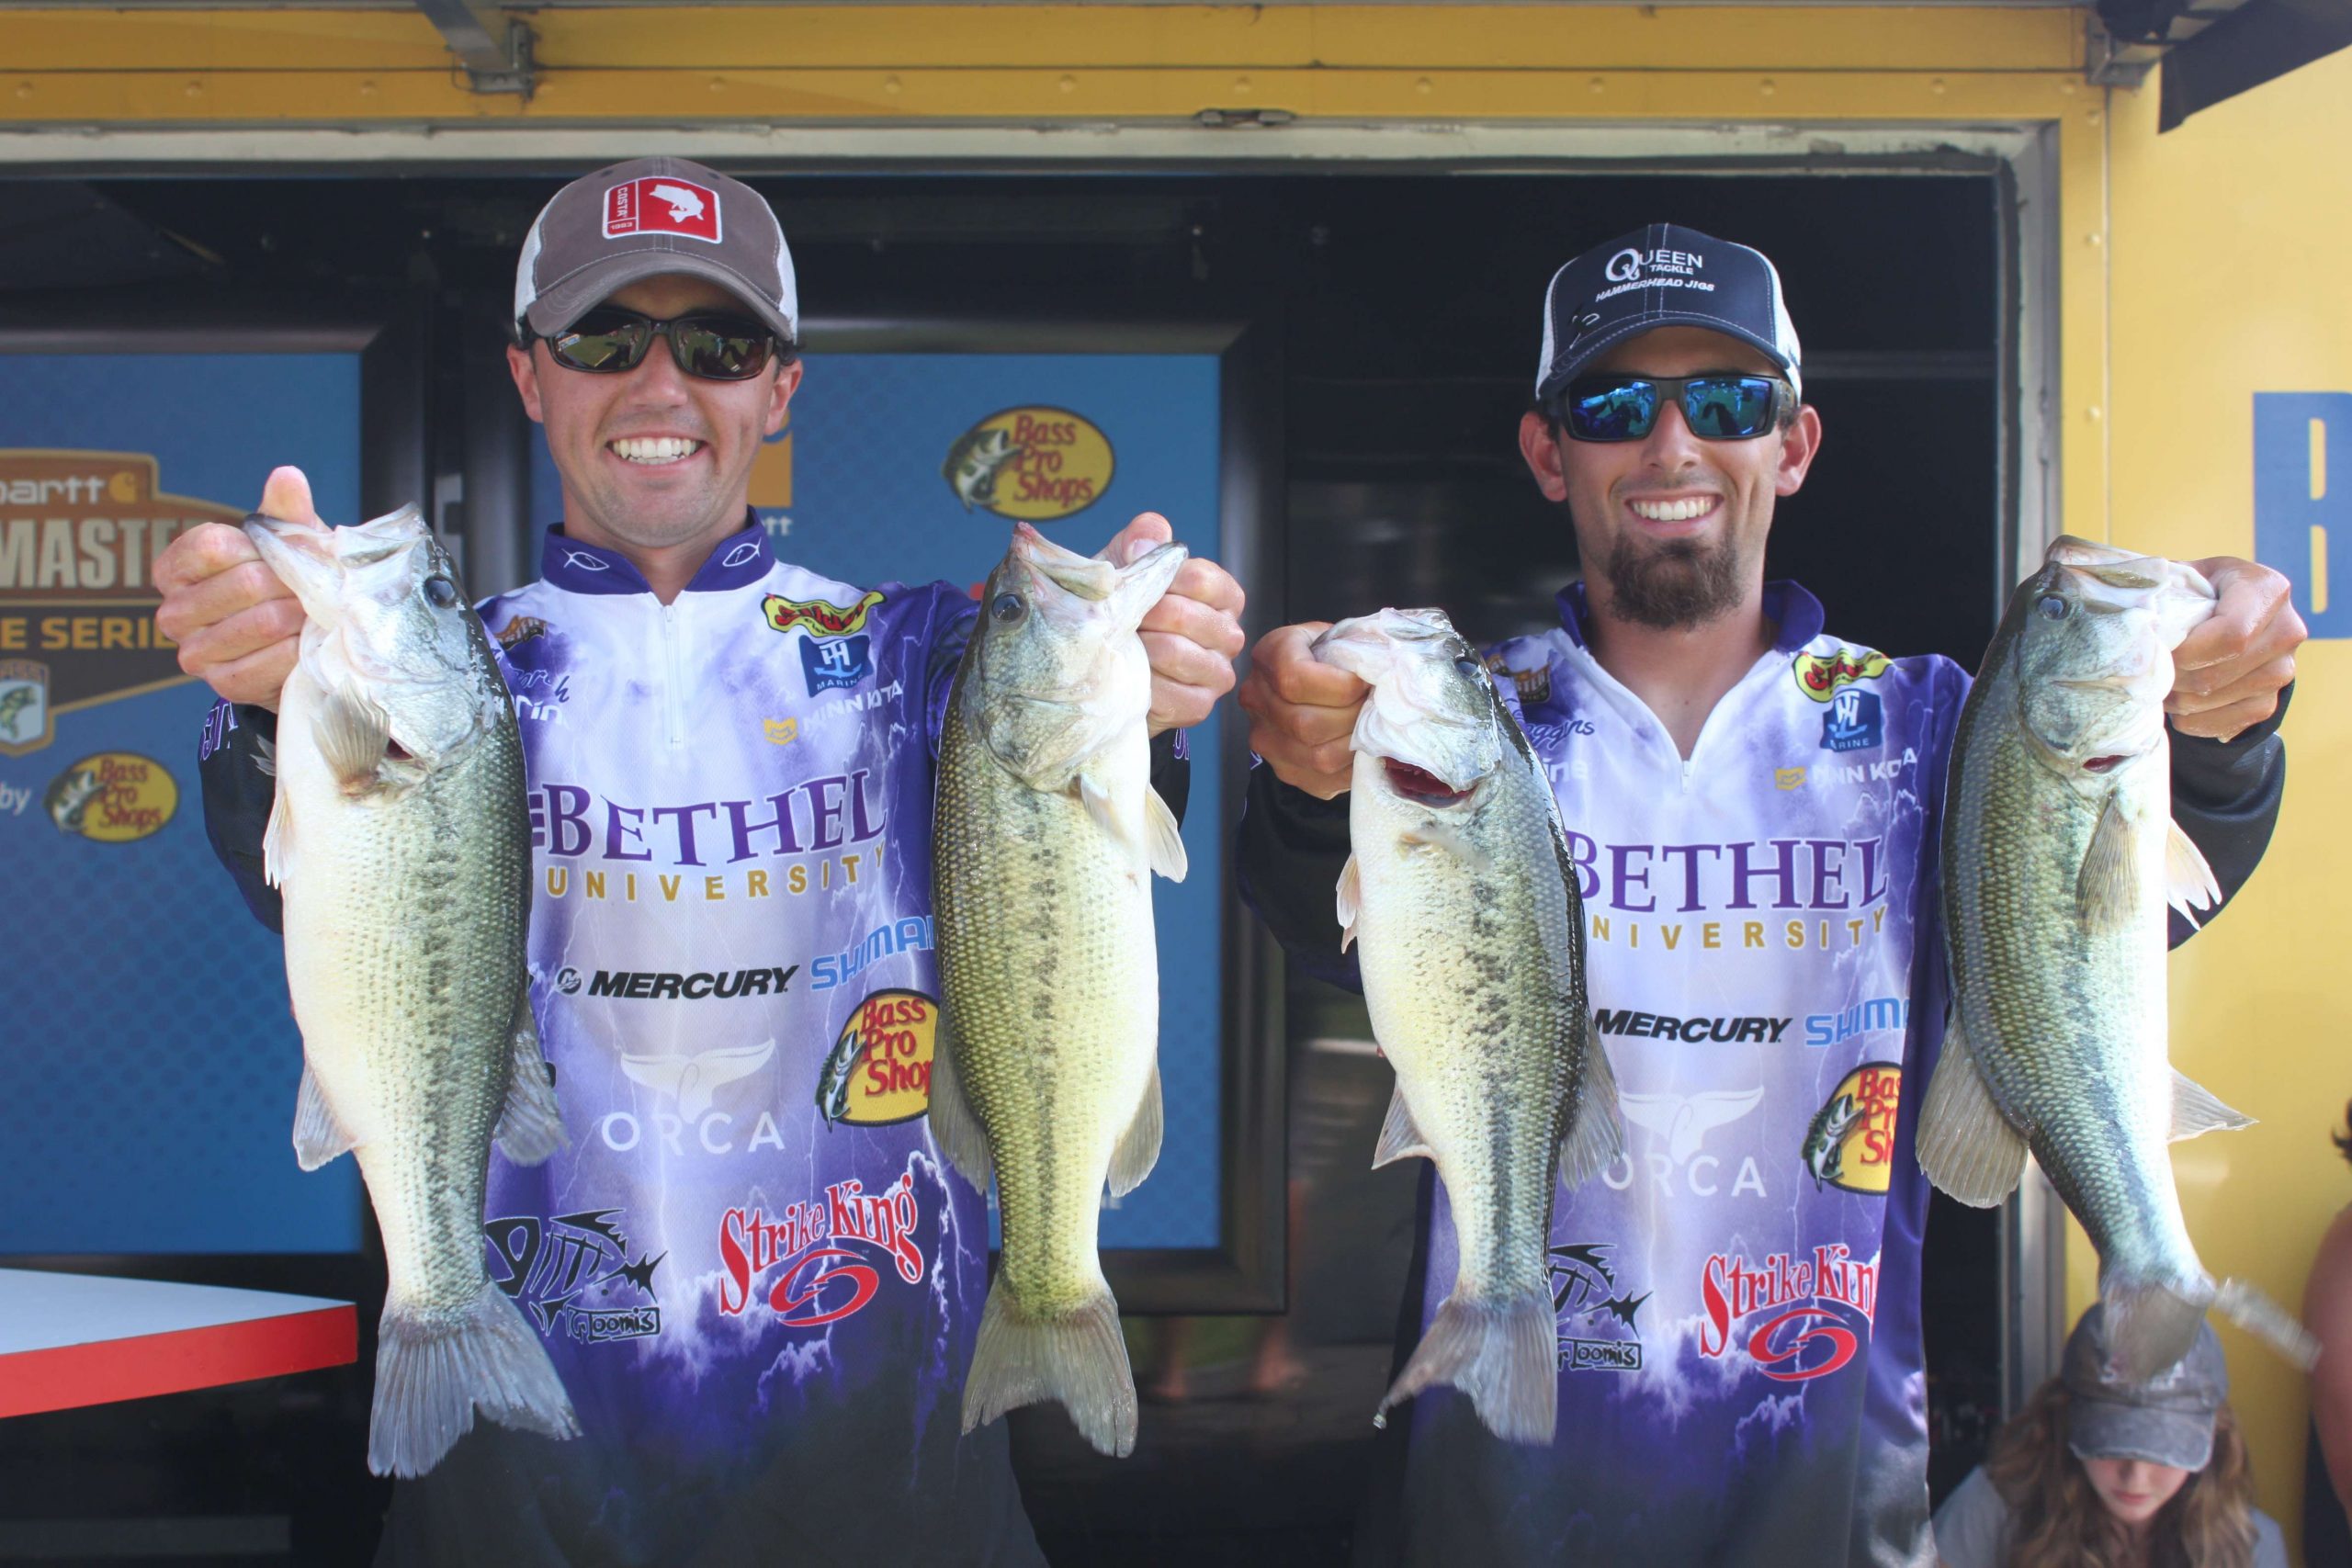 And the Day 2 leaders come to stage. Cully Scroggins and Nathon Portch of Bethel University maintained their lead on Friday with a limit that weighed 12-5; giving them 29-12 for the tournament.